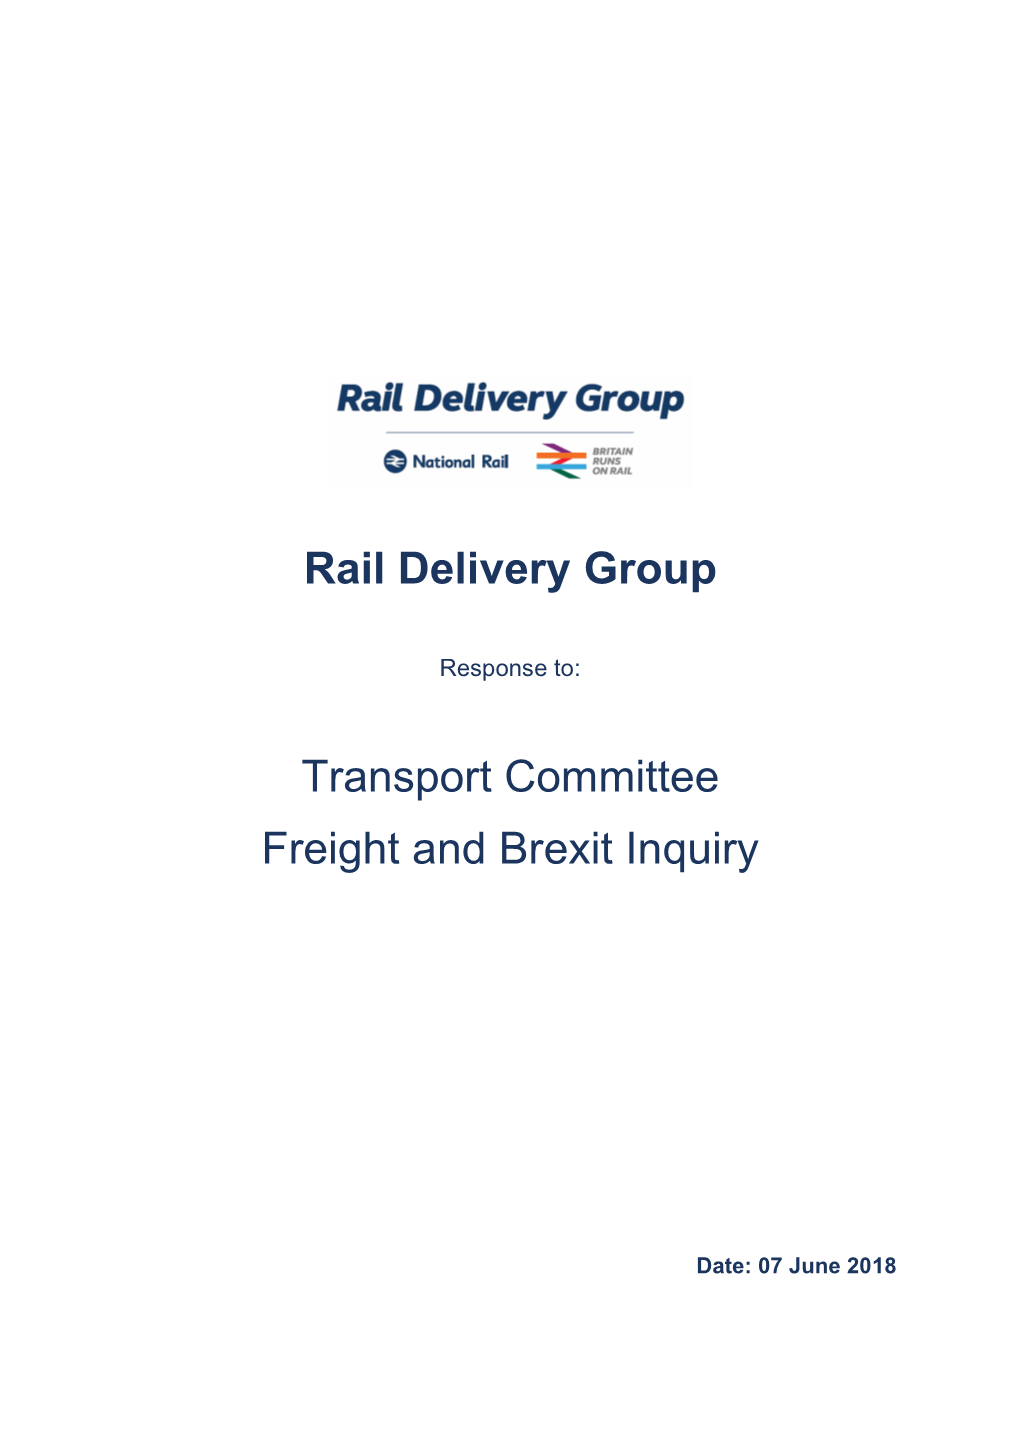 Transport Committee's Freight Brexit Inquiry